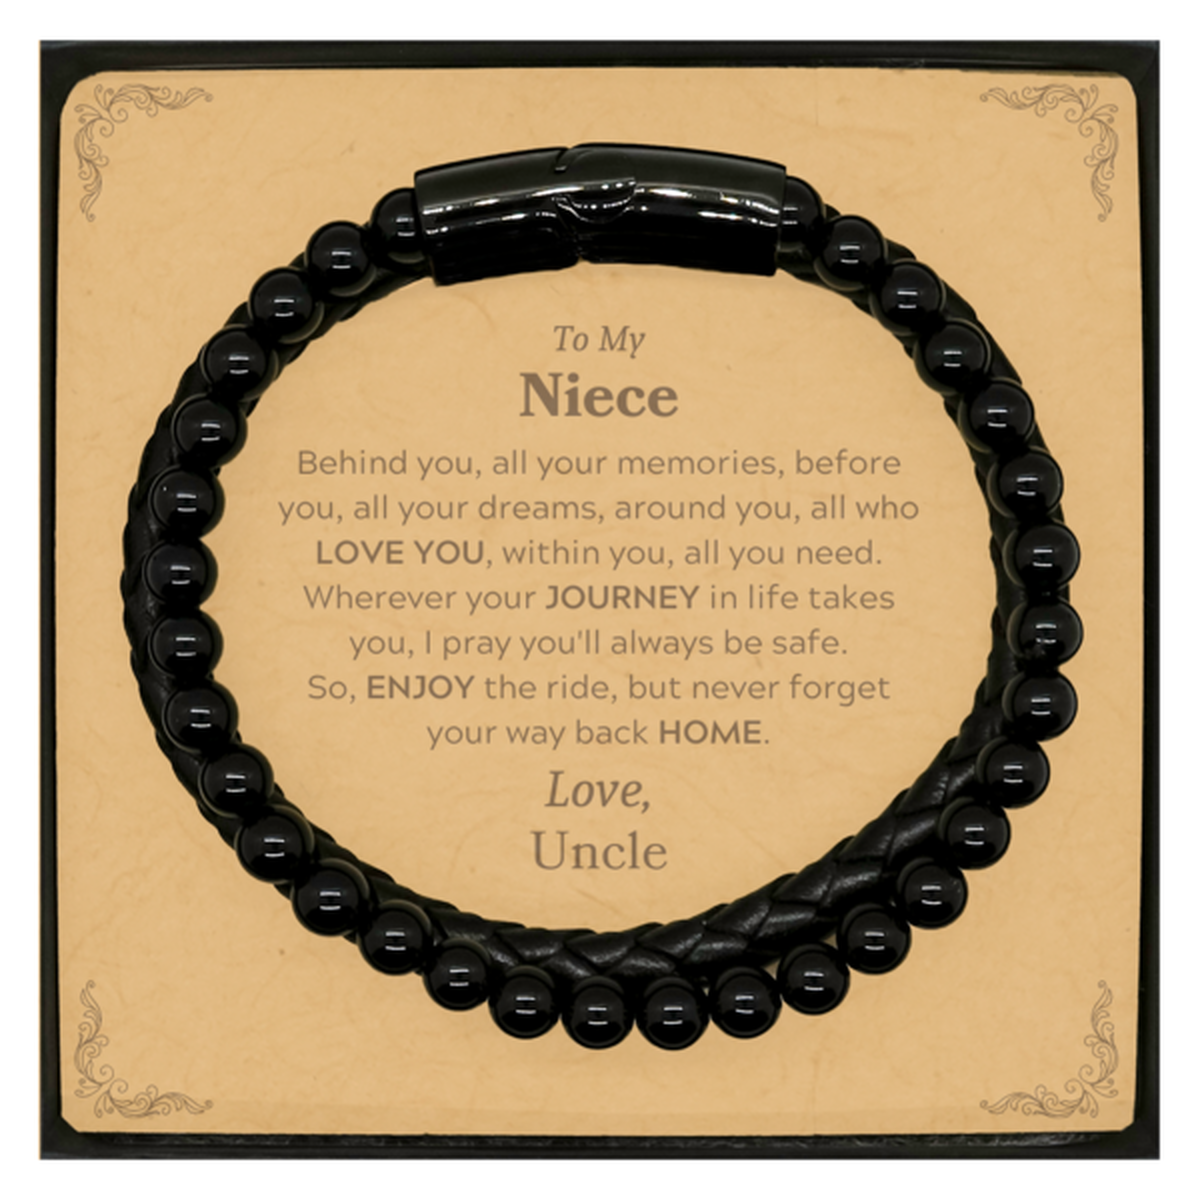 To My Niece Graduation Gifts from Uncle, Niece Stone Leather Bracelets Christmas Birthday Gifts for Niece Behind you, all your memories, before you, all your dreams. Love, Uncle